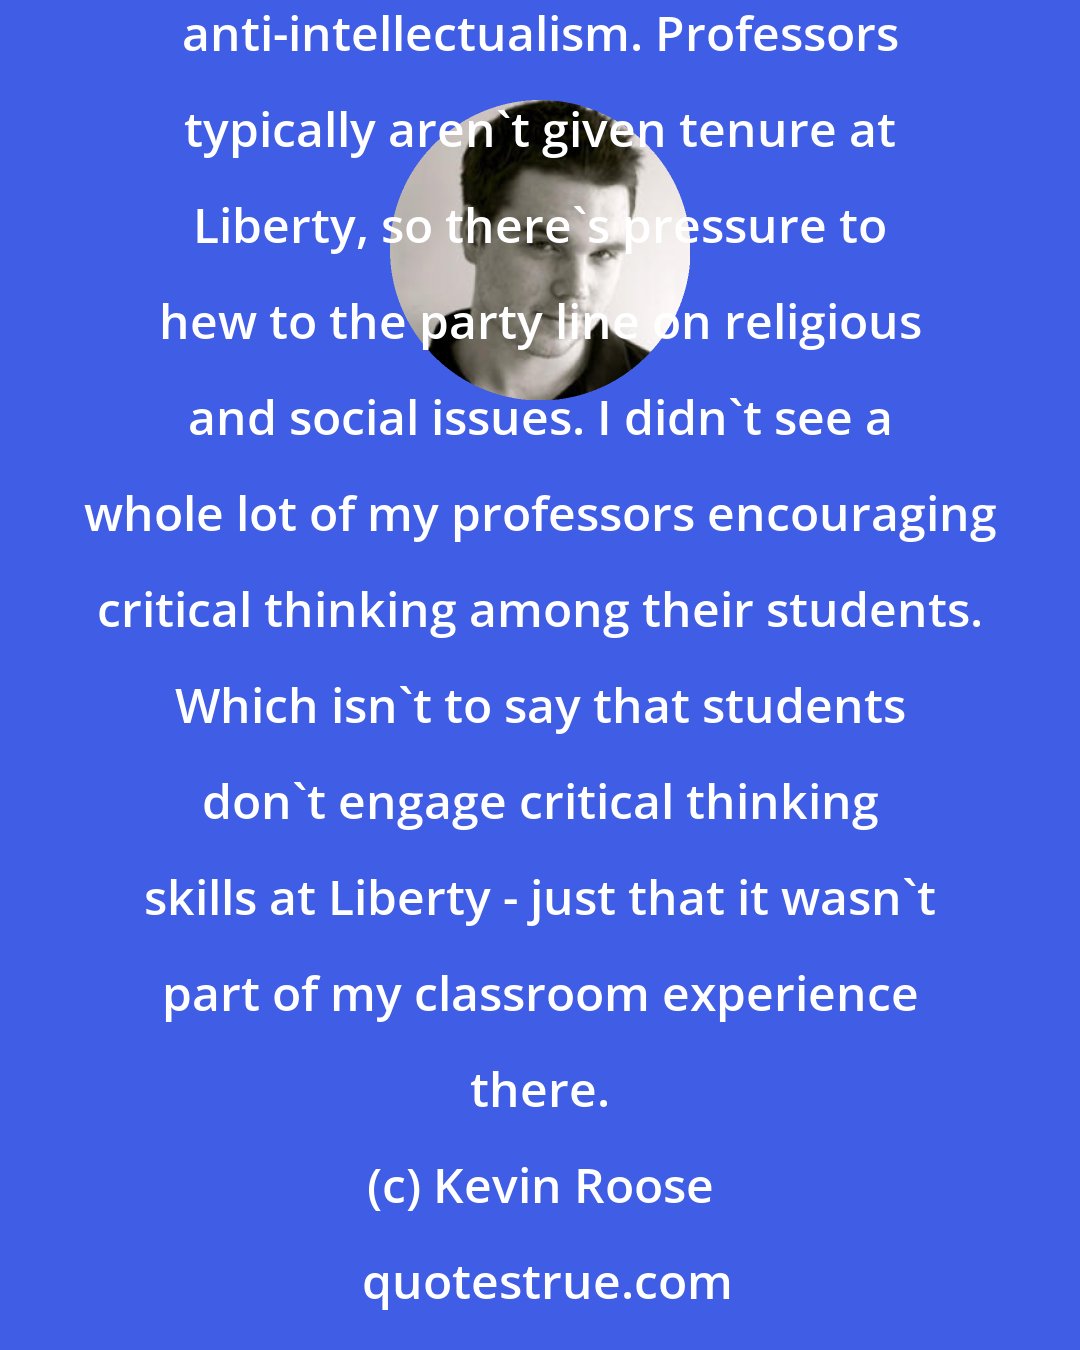 Kevin Roose: In some of the classes, especially the introductory religion courses I took, the professors can veer into a particular strain of religious anti-intellectualism. Professors typically aren't given tenure at Liberty, so there's pressure to hew to the party line on religious and social issues. I didn't see a whole lot of my professors encouraging critical thinking among their students. Which isn't to say that students don't engage critical thinking skills at Liberty - just that it wasn't part of my classroom experience there.